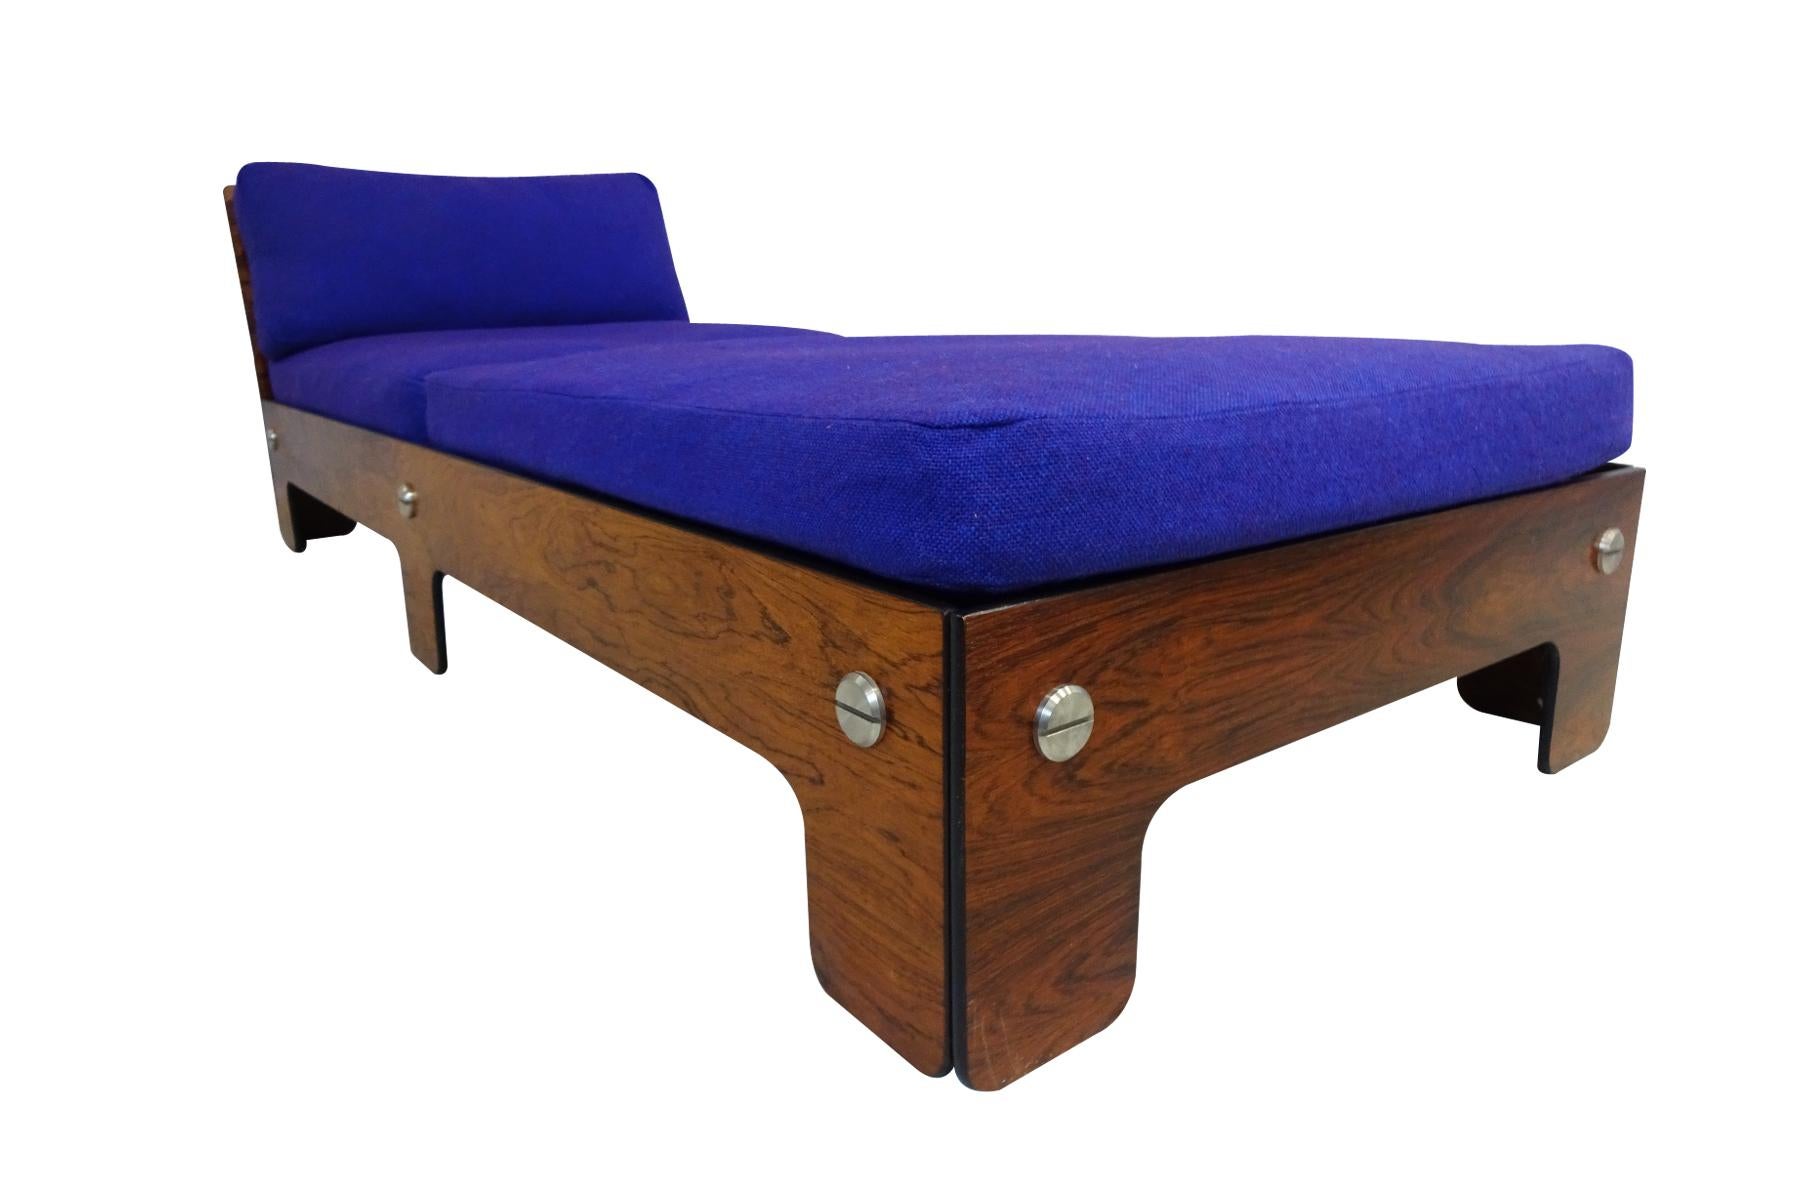 European Vintage Midcentury Chaise Longue or Day Bed